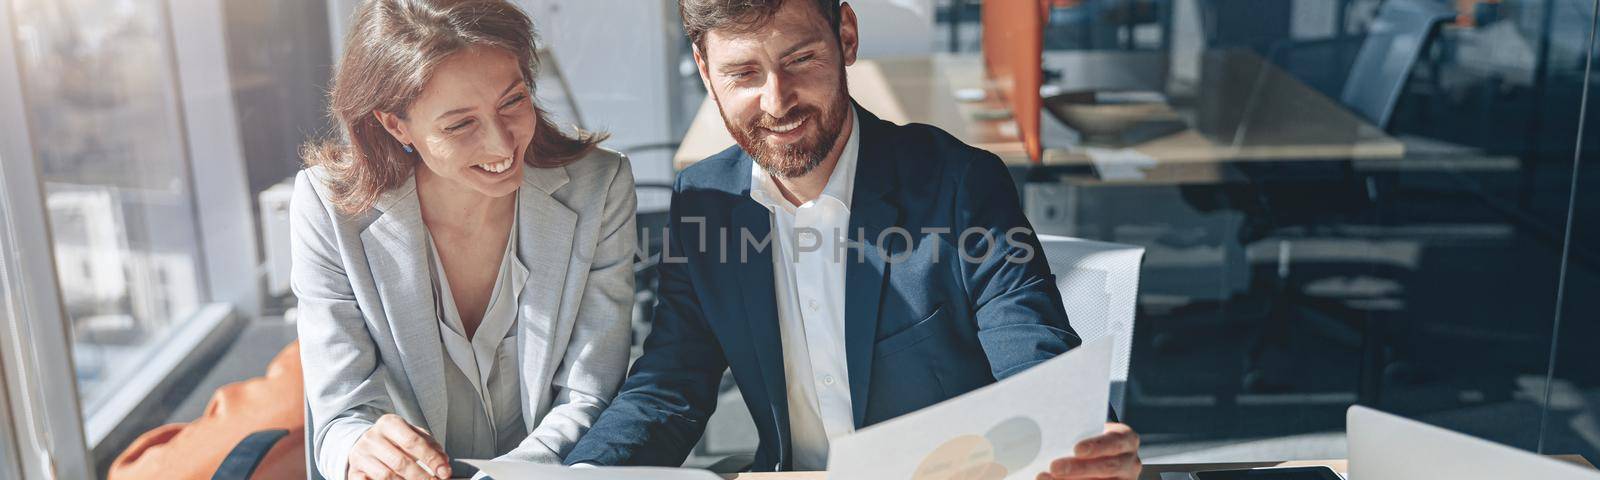 Positive business people on laptop during a meeting discussing financial charts by Yaroslav_astakhov